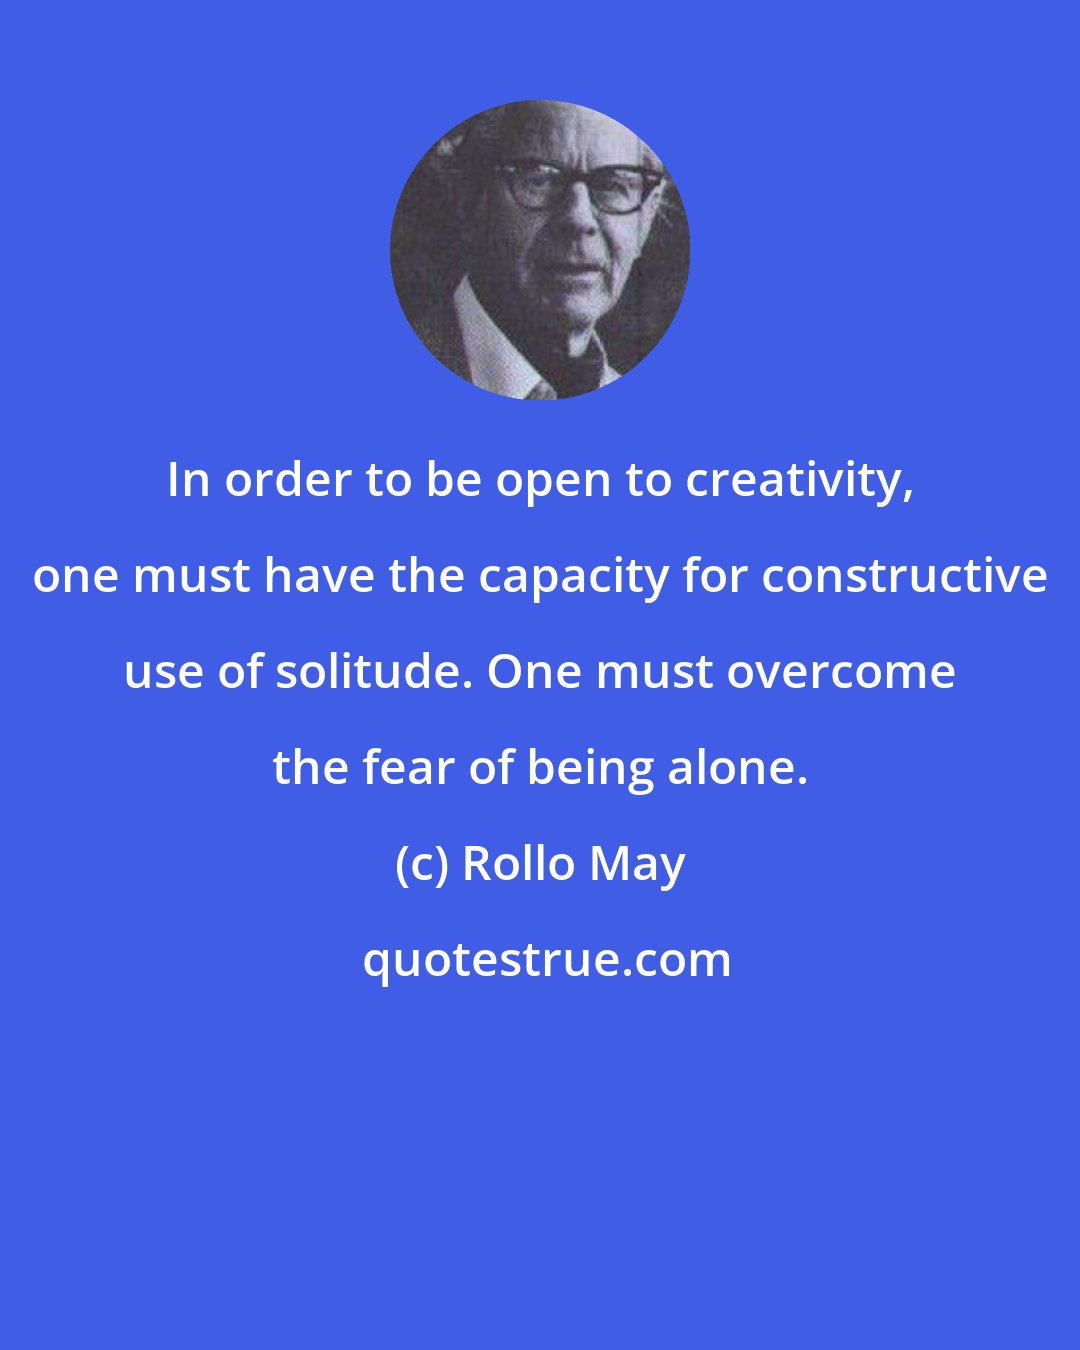 Rollo May: In order to be open to creativity, one must have the capacity for constructive use of solitude. One must overcome the fear of being alone.